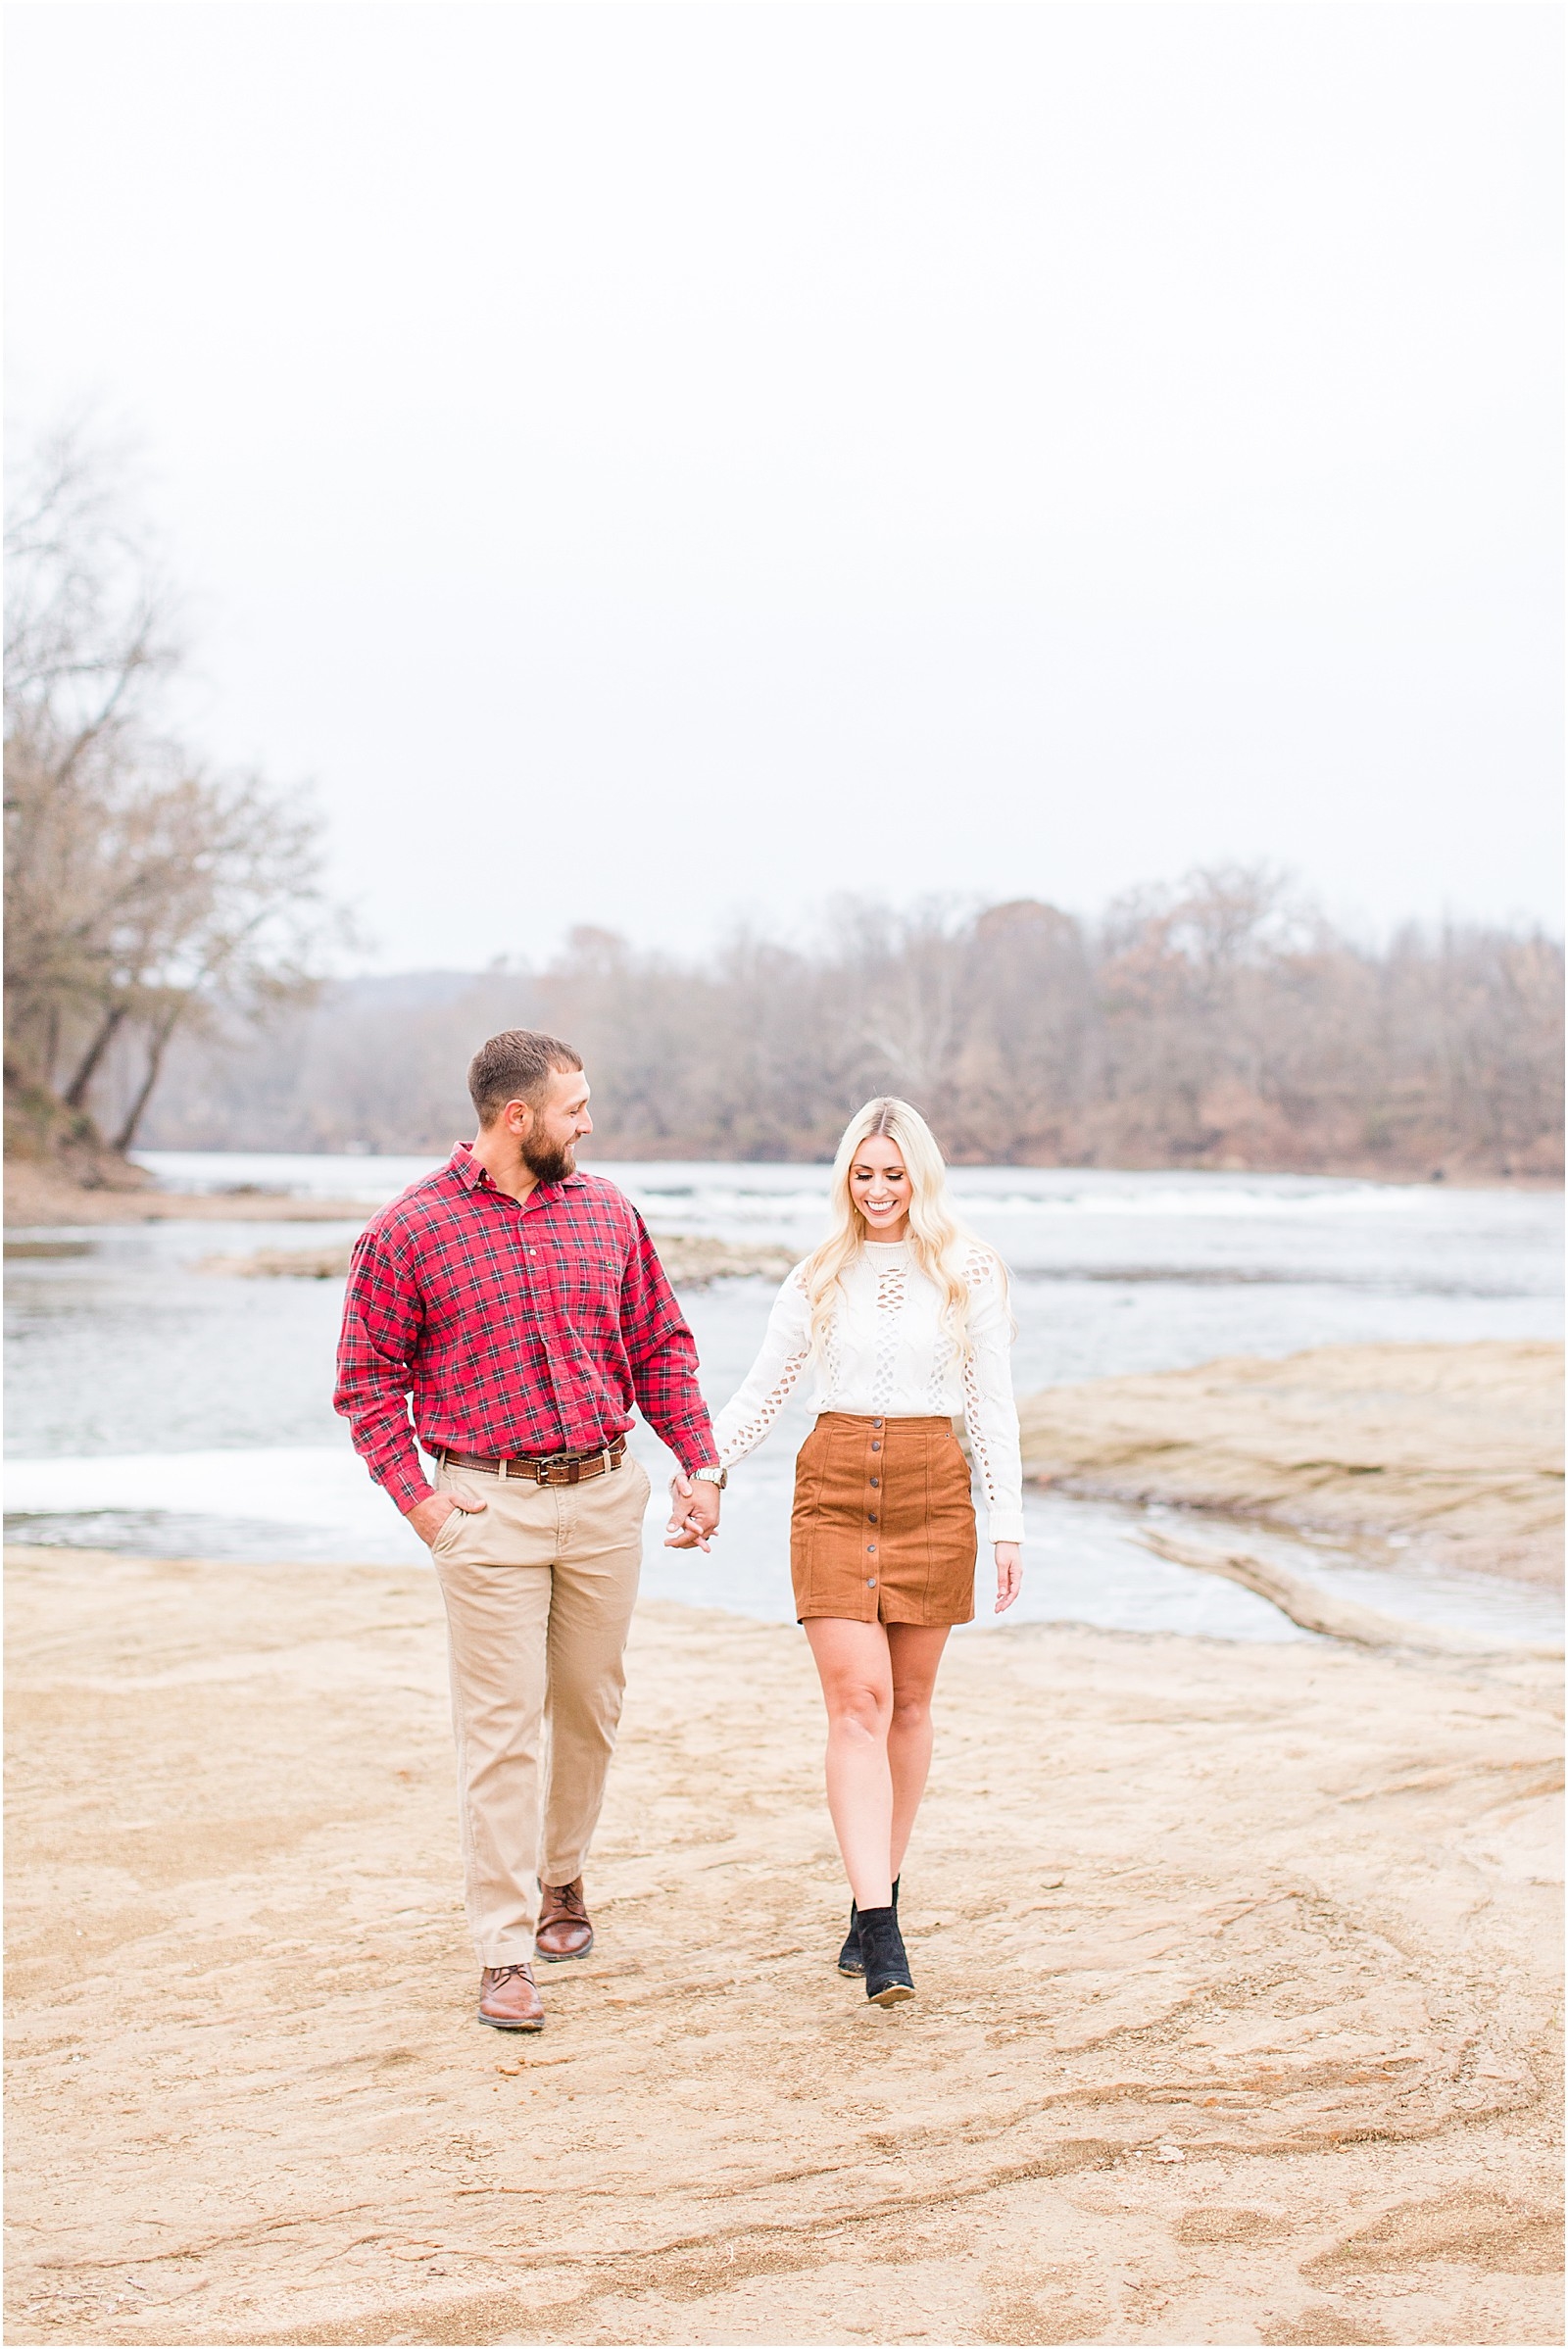 An sweet and snuggly fall anniversary session in Loogootee, Indiana. | #anniversarysession #fallsession #southernindianawedding | 002.jpg